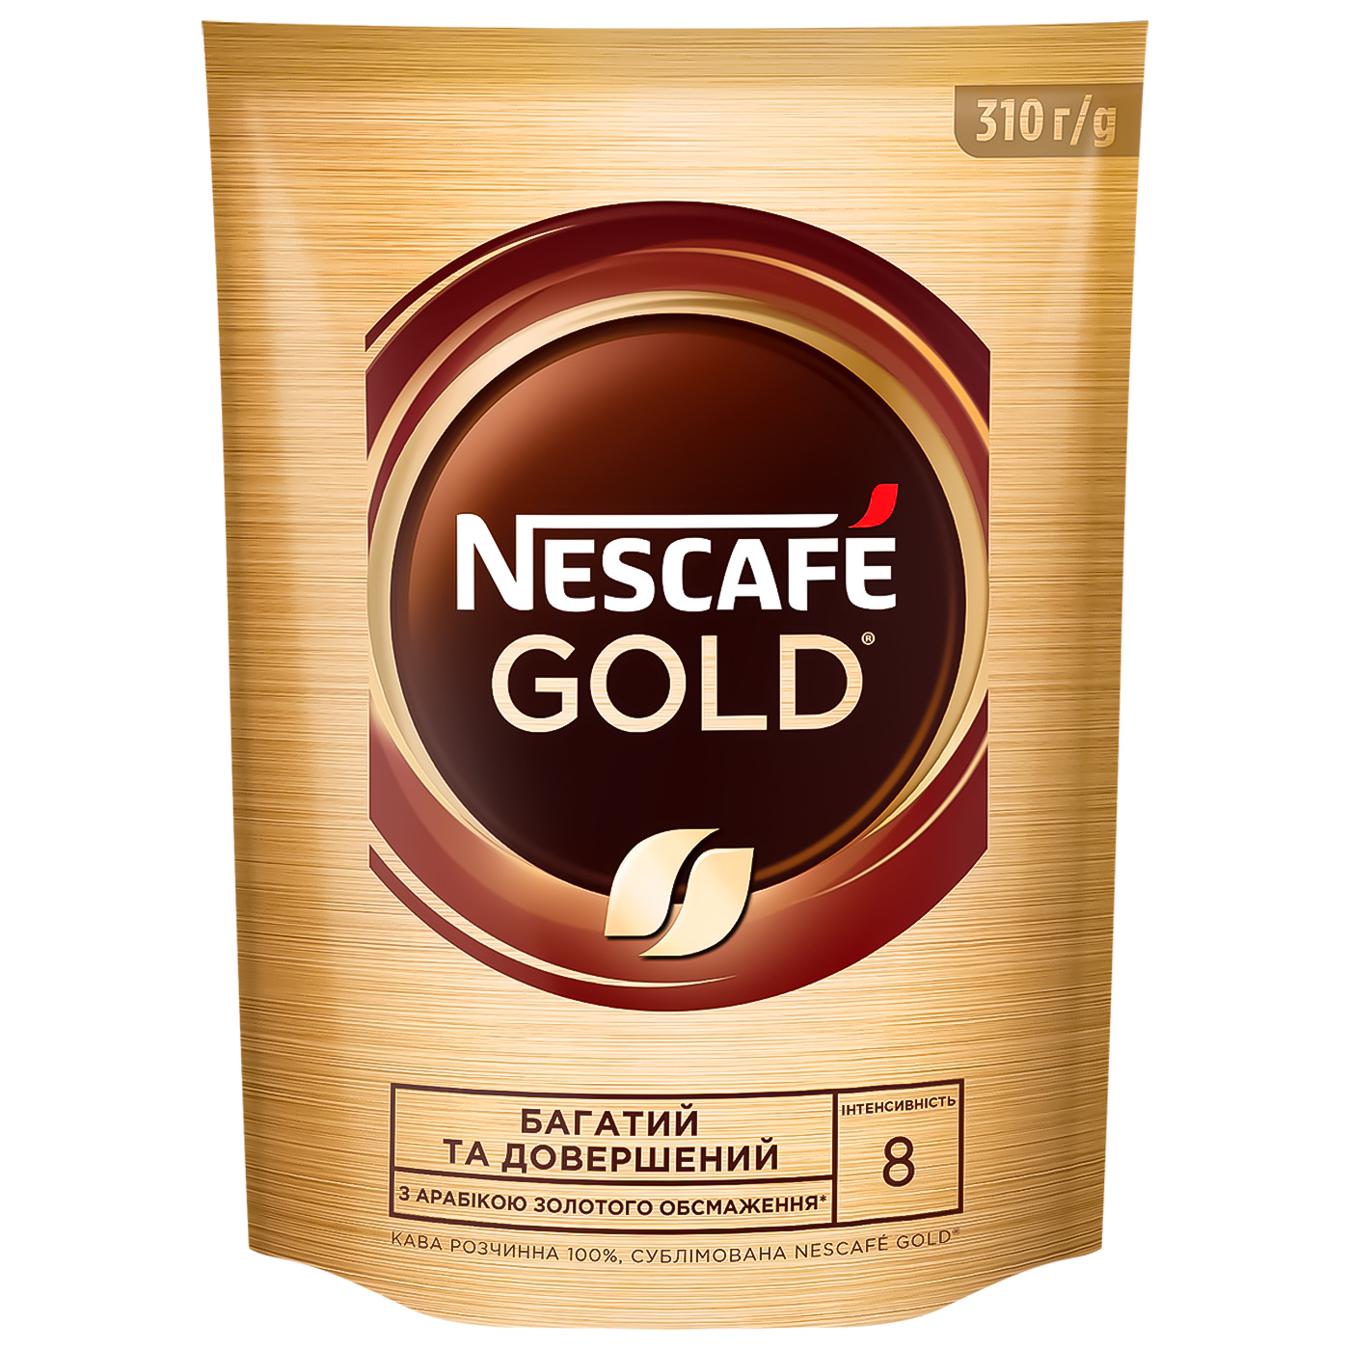 Instant coffee Nescafe Gold 310g